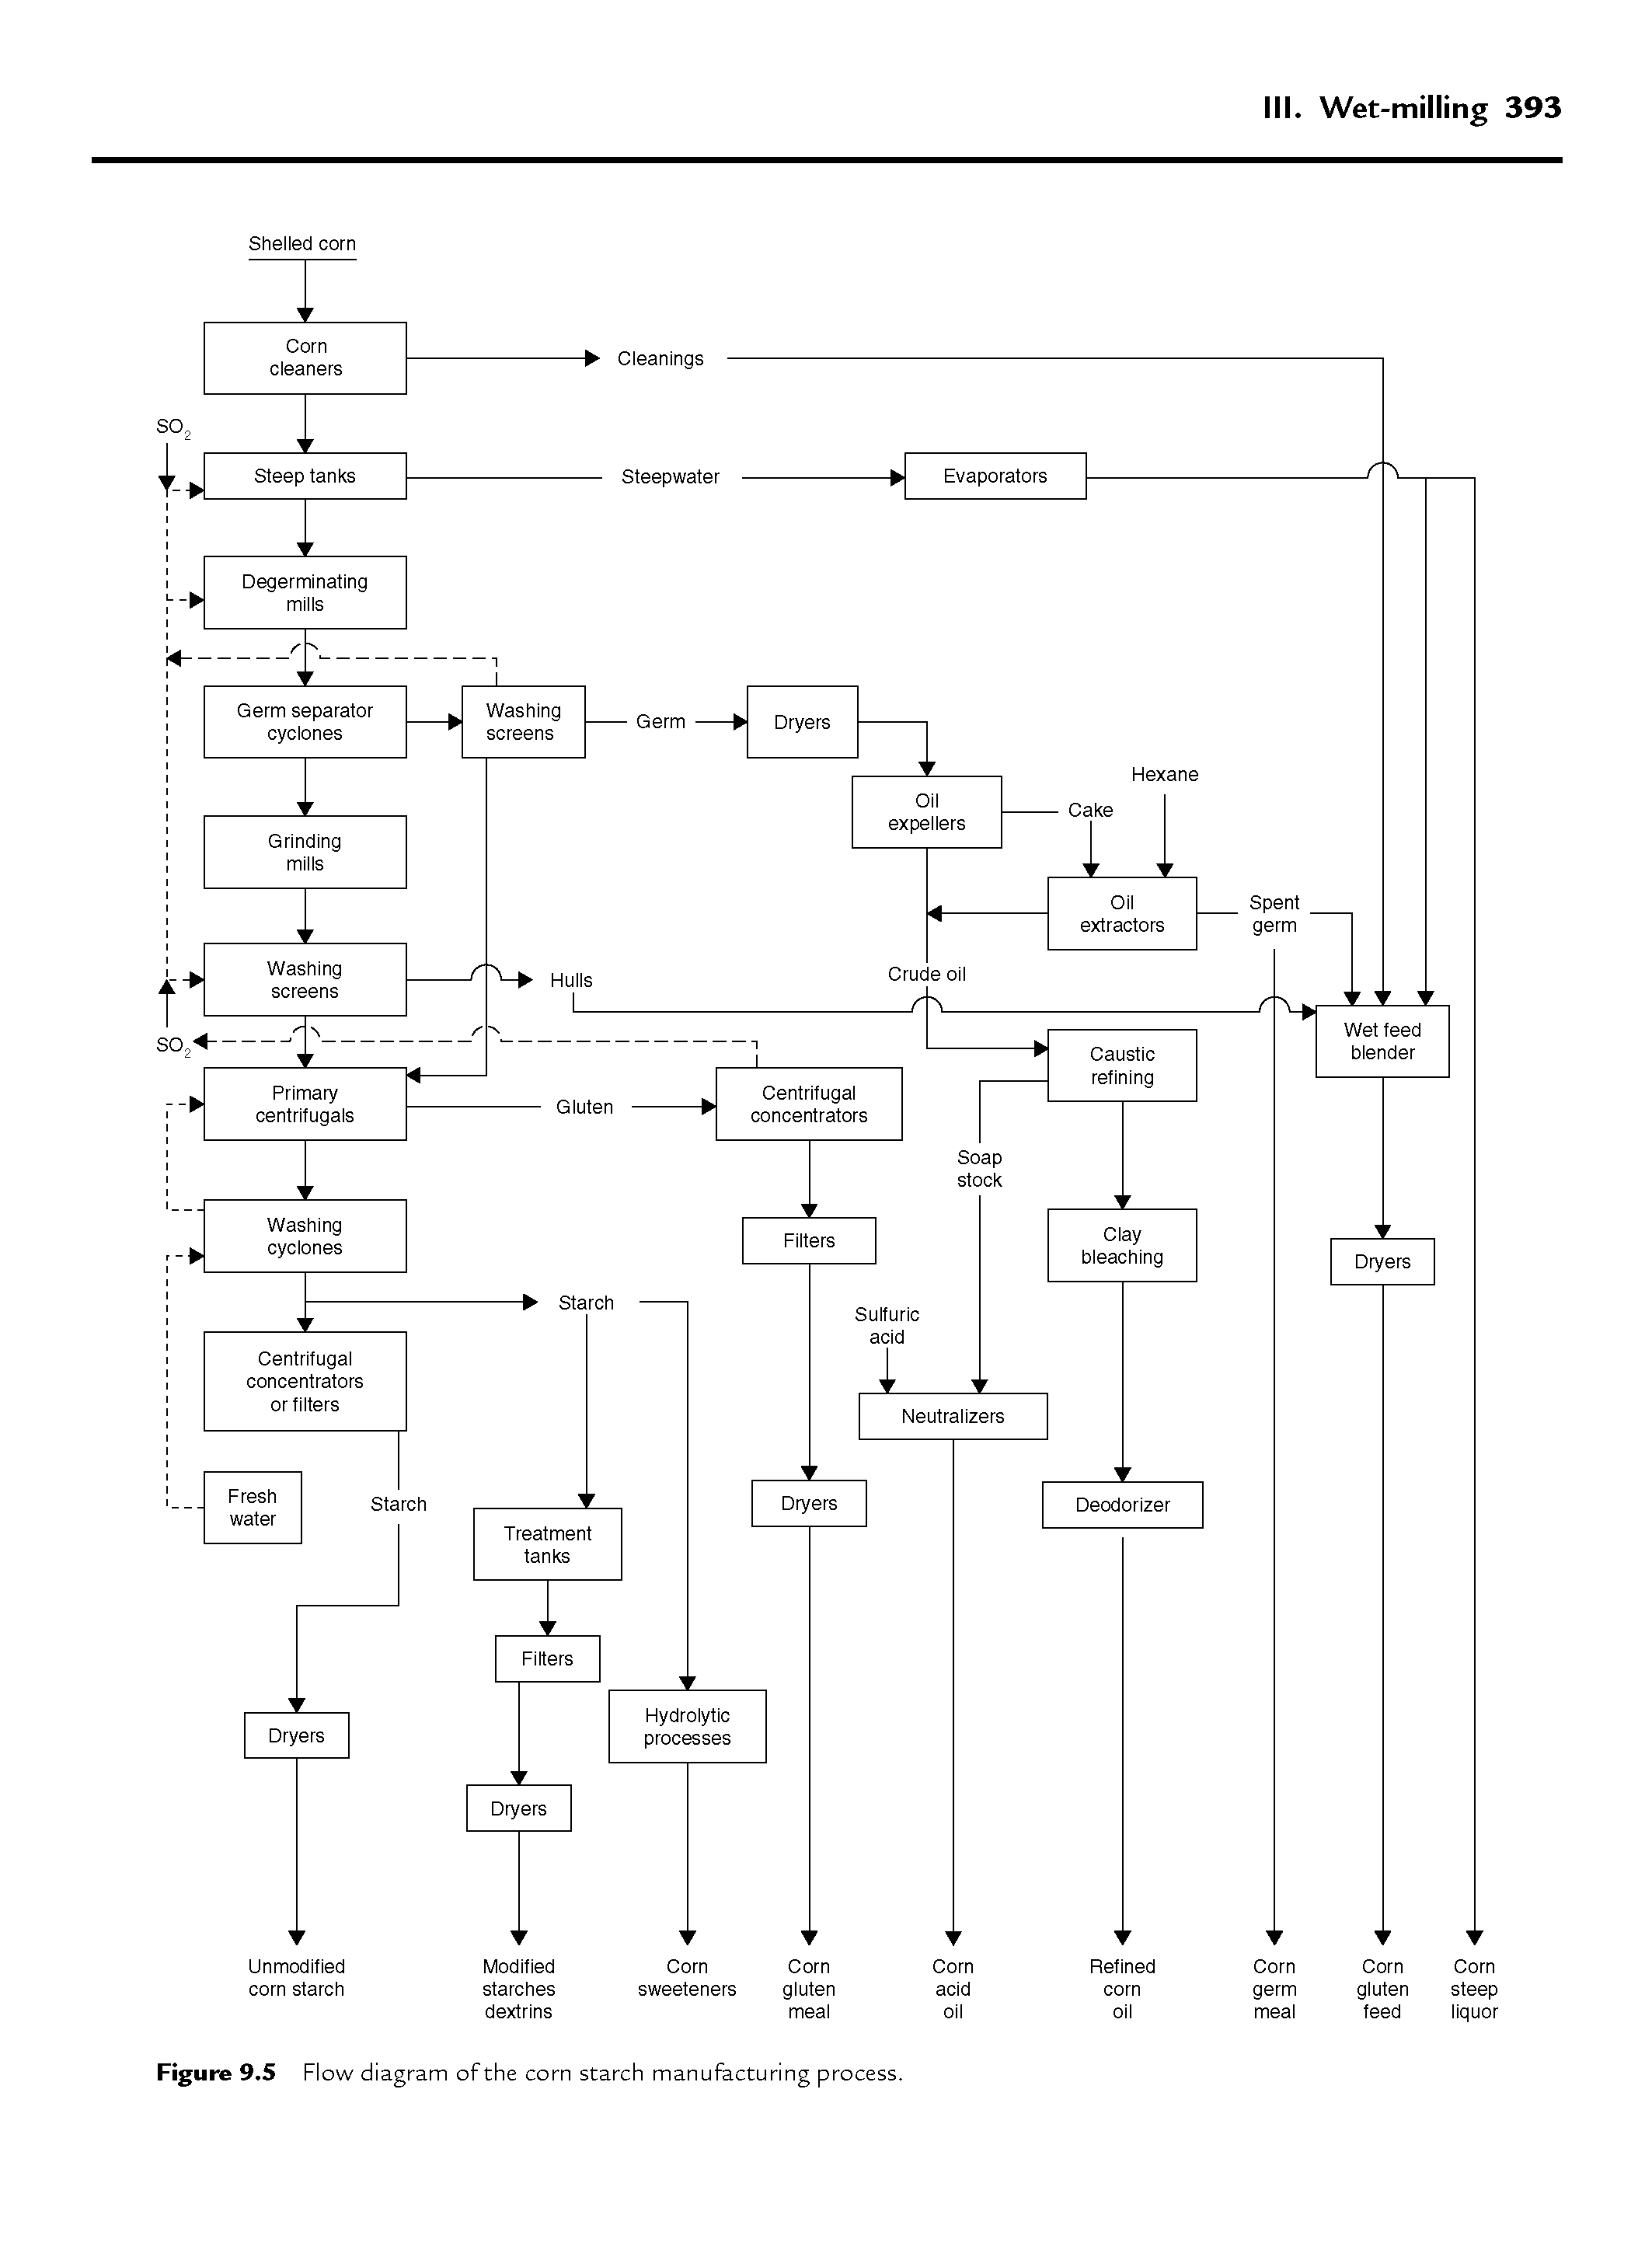 Figure 9.5 Flow diagram of the com starch manufacturing process.